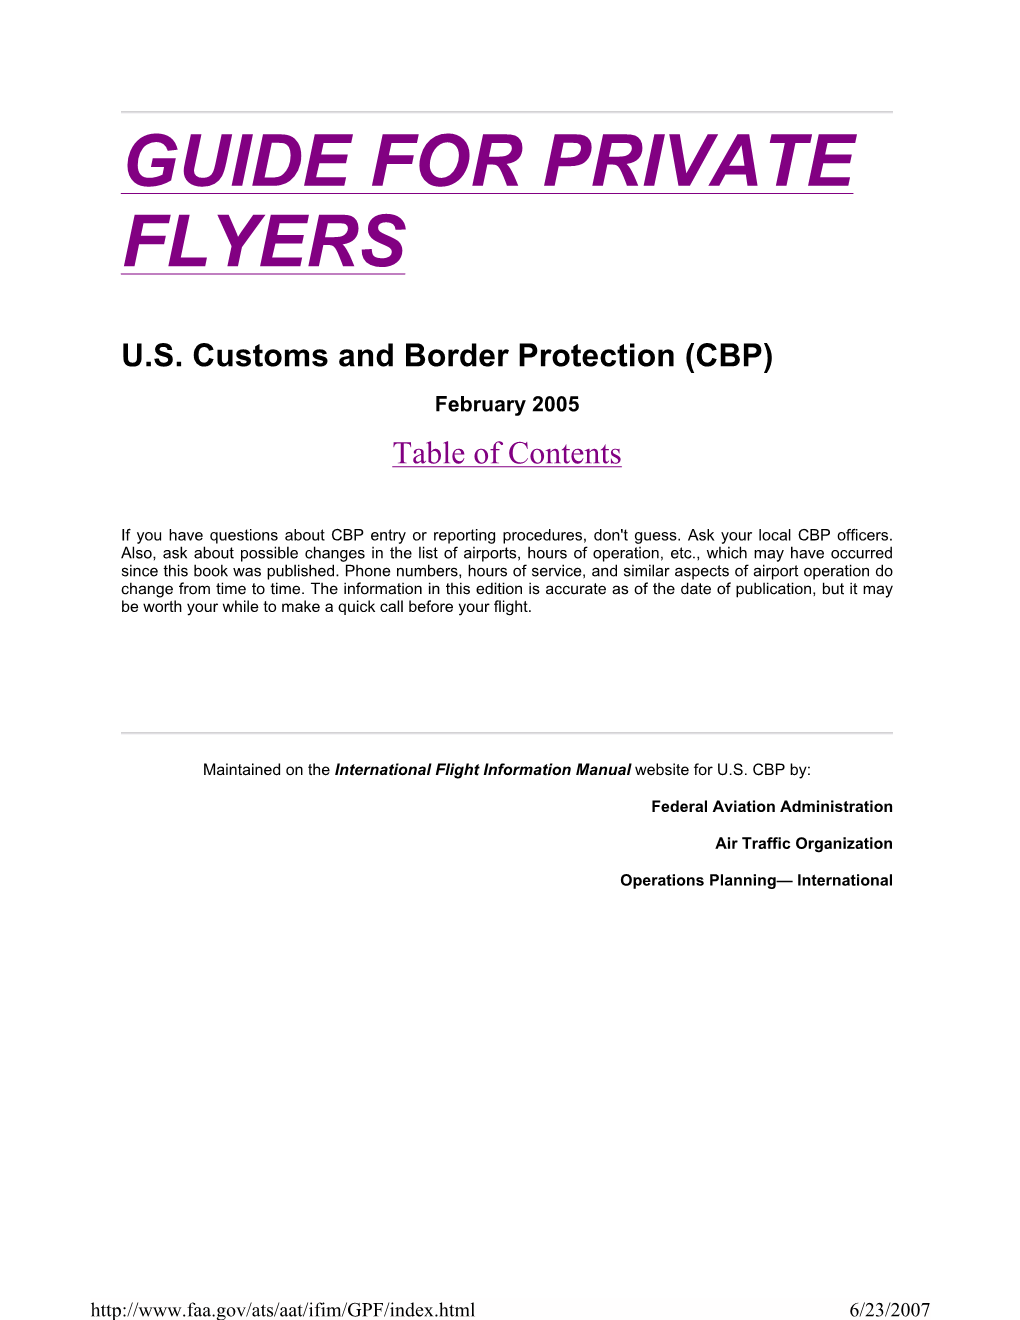 Guide for Private Flyers